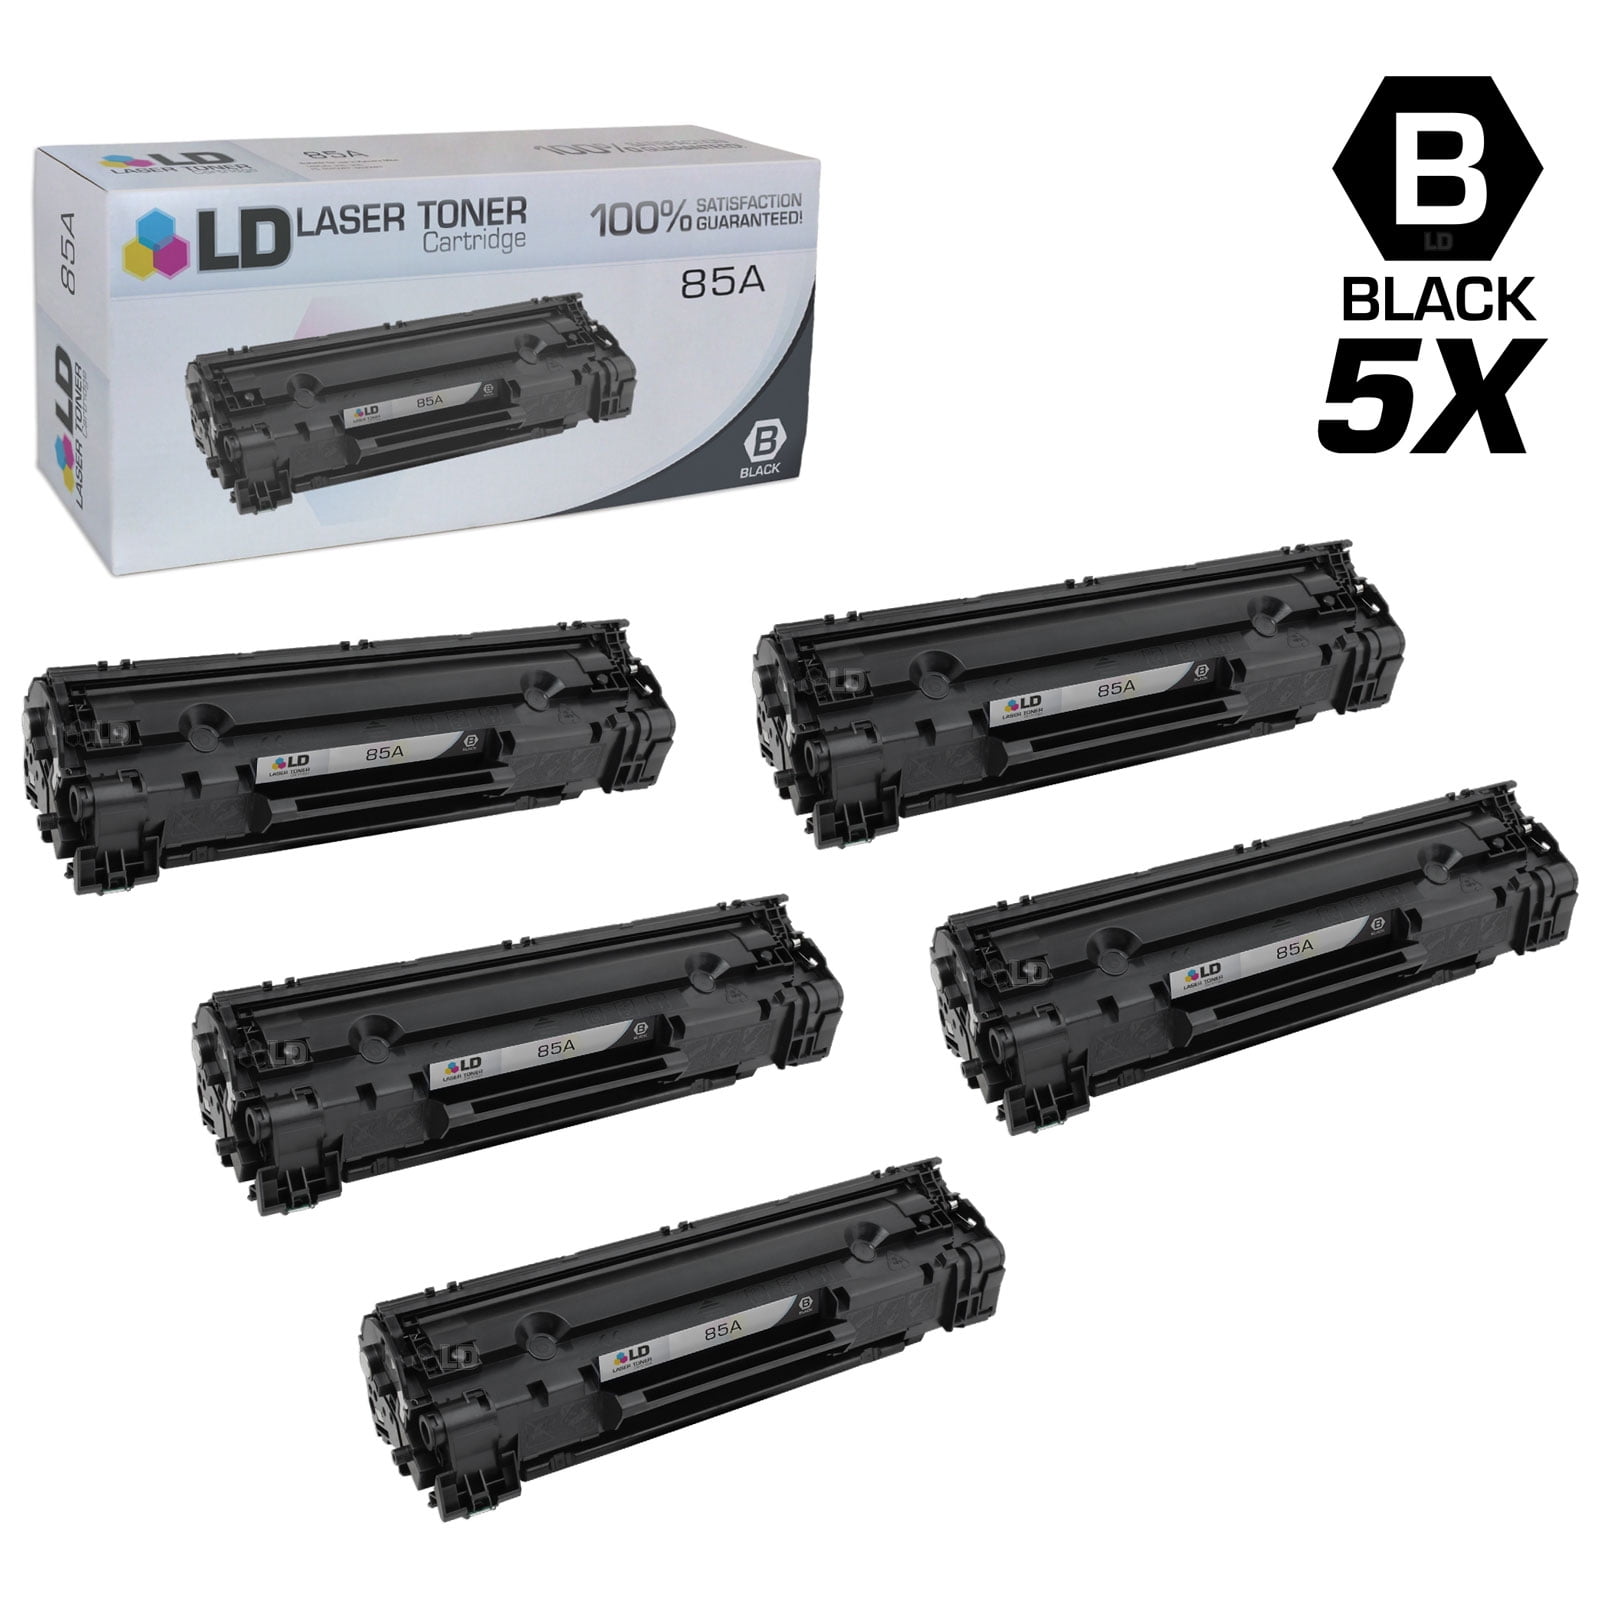 LD Compatible Replacements for 85A CE285A Black Toner Cartridges 5-Pack for  use in LaserJet Pro M1132, M1138, M1139, M1212nf, M1217nfw MFP, M1219nf,  P1102, P1102s, P1102W, P1106, P1109W - Walmart.com